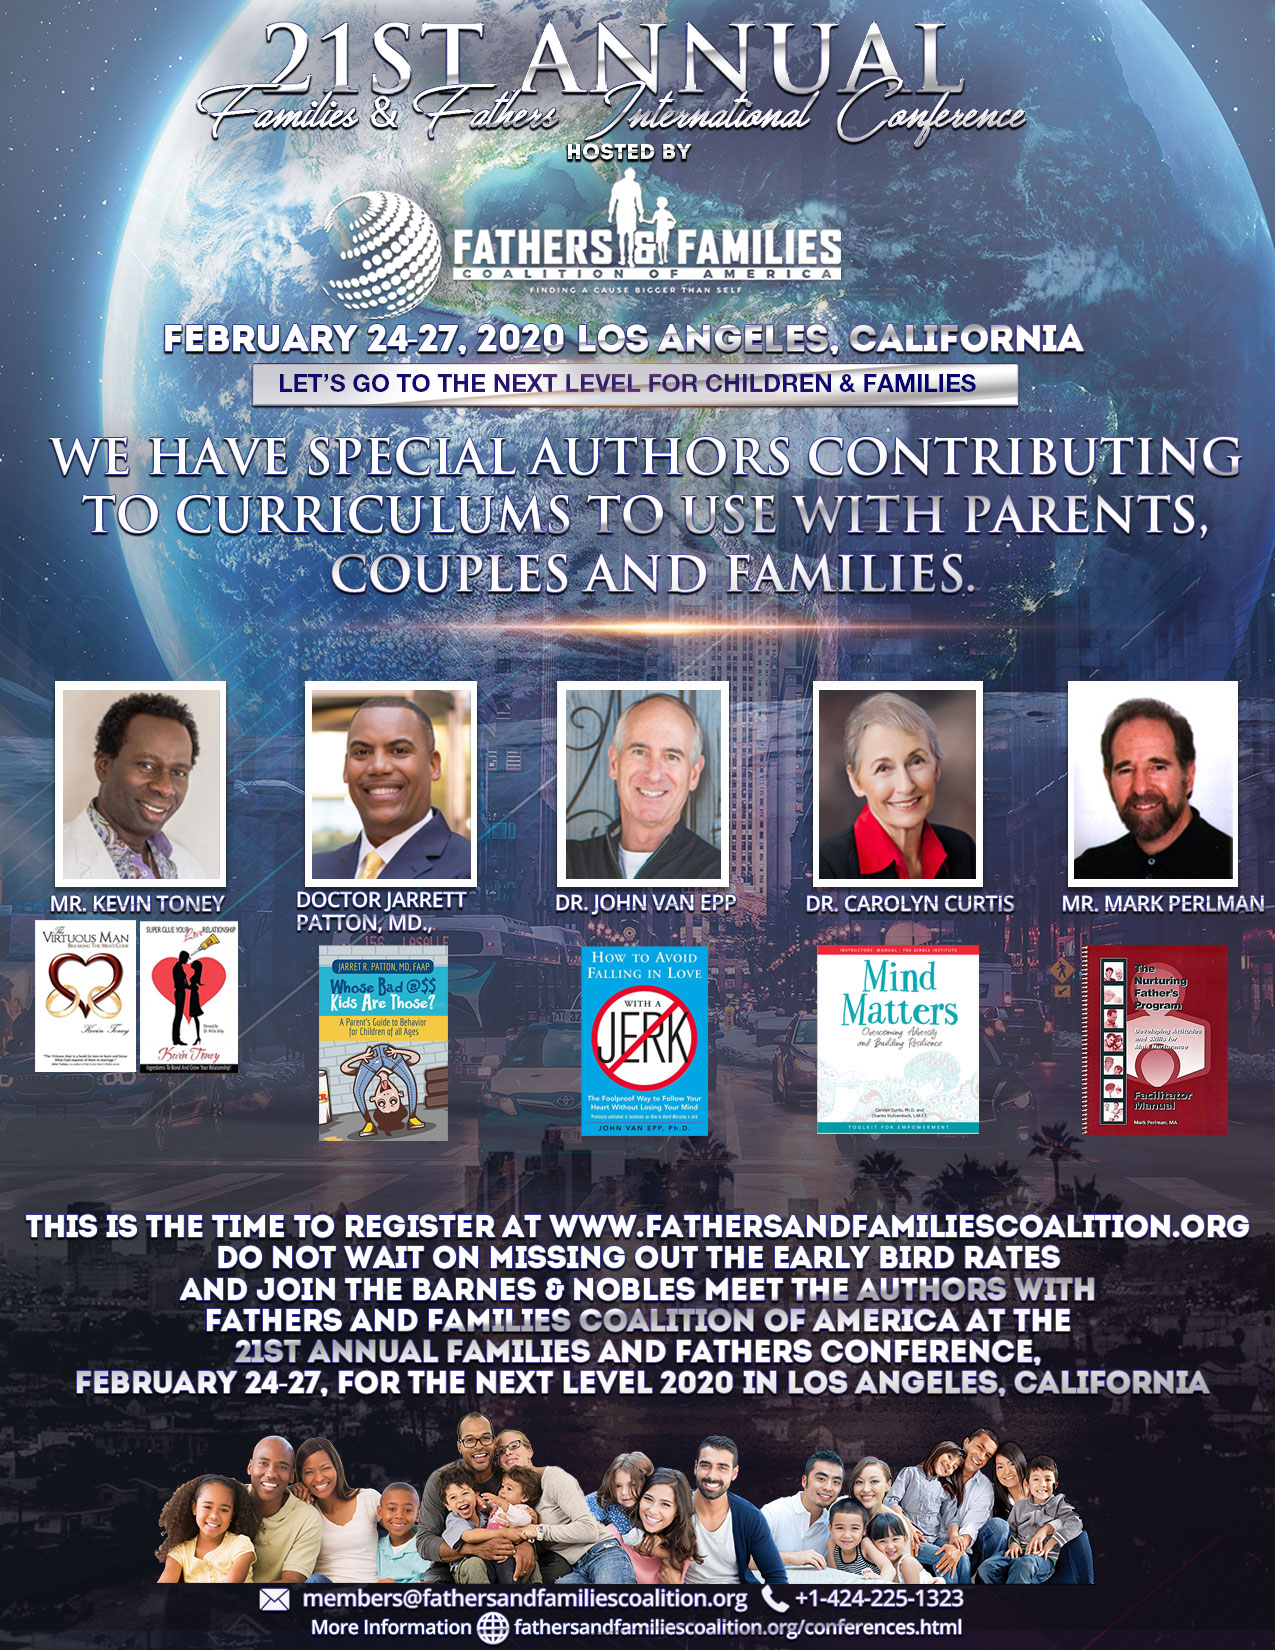 Meeting Authors Teaching and Learning with Others at The Next Level 2020